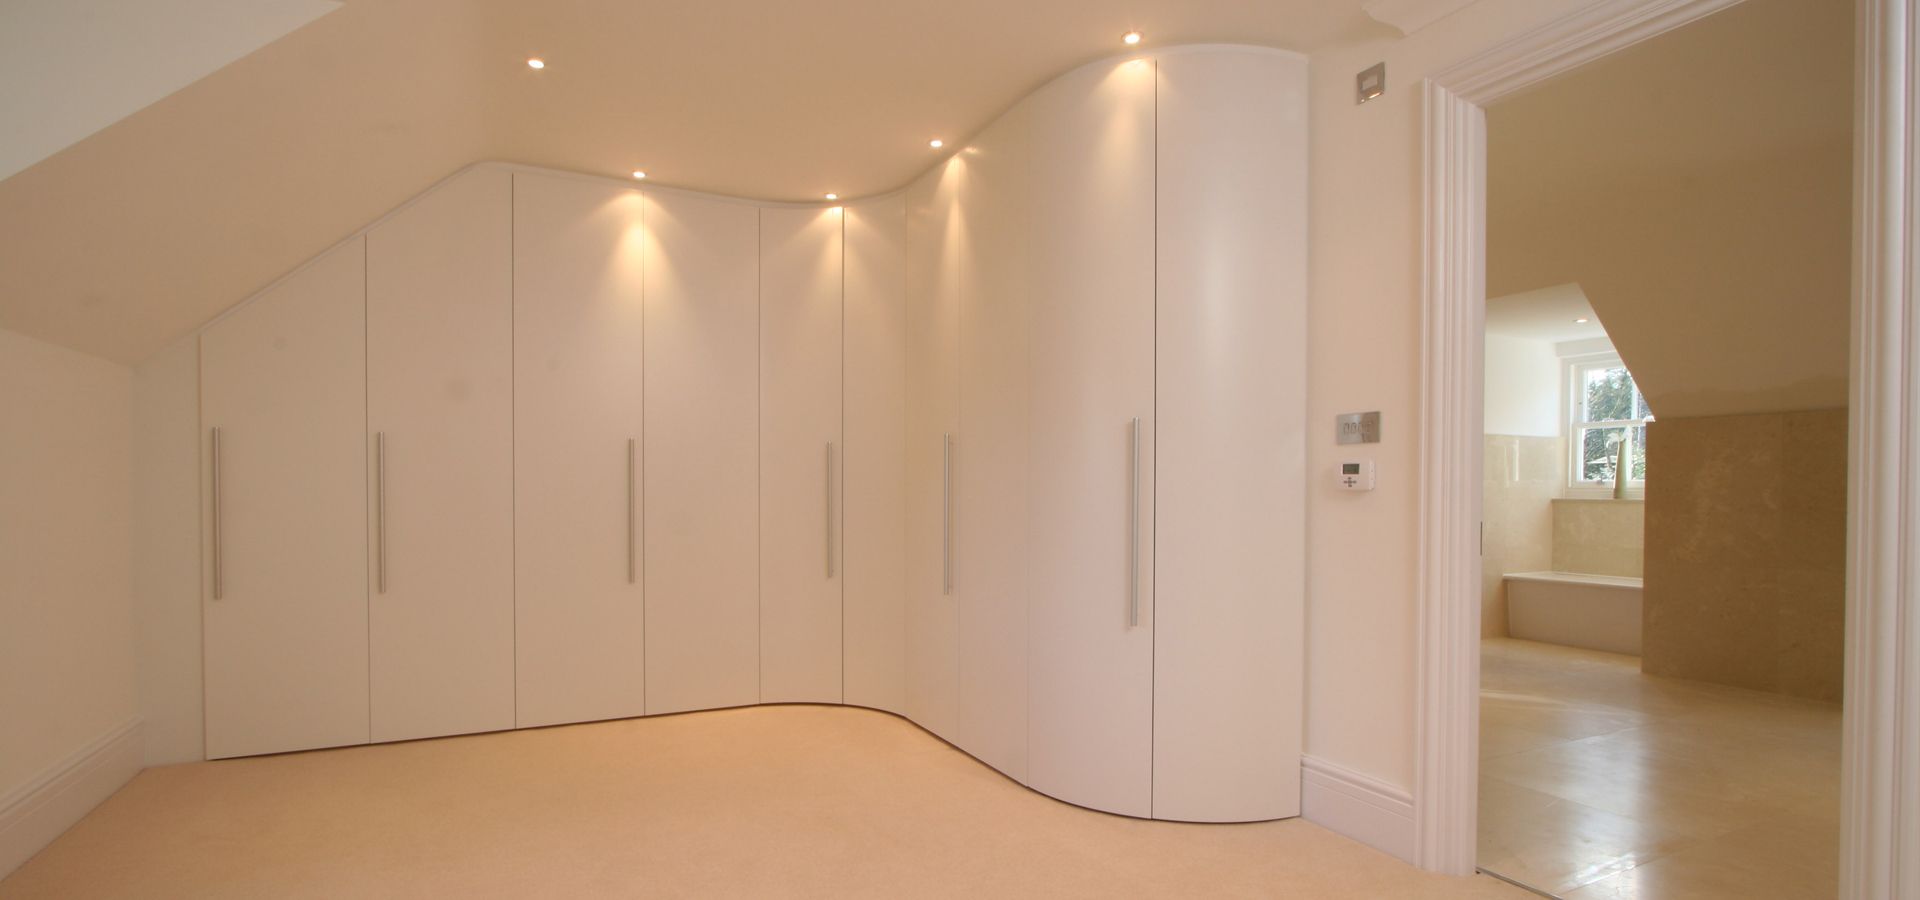 Alfa Curve – Fitted Bedroom Furniture | Wardrobes Uk | Lawrence Walsh  Furniture Within Curved Wardrobes Doors (Gallery 12 of 20)